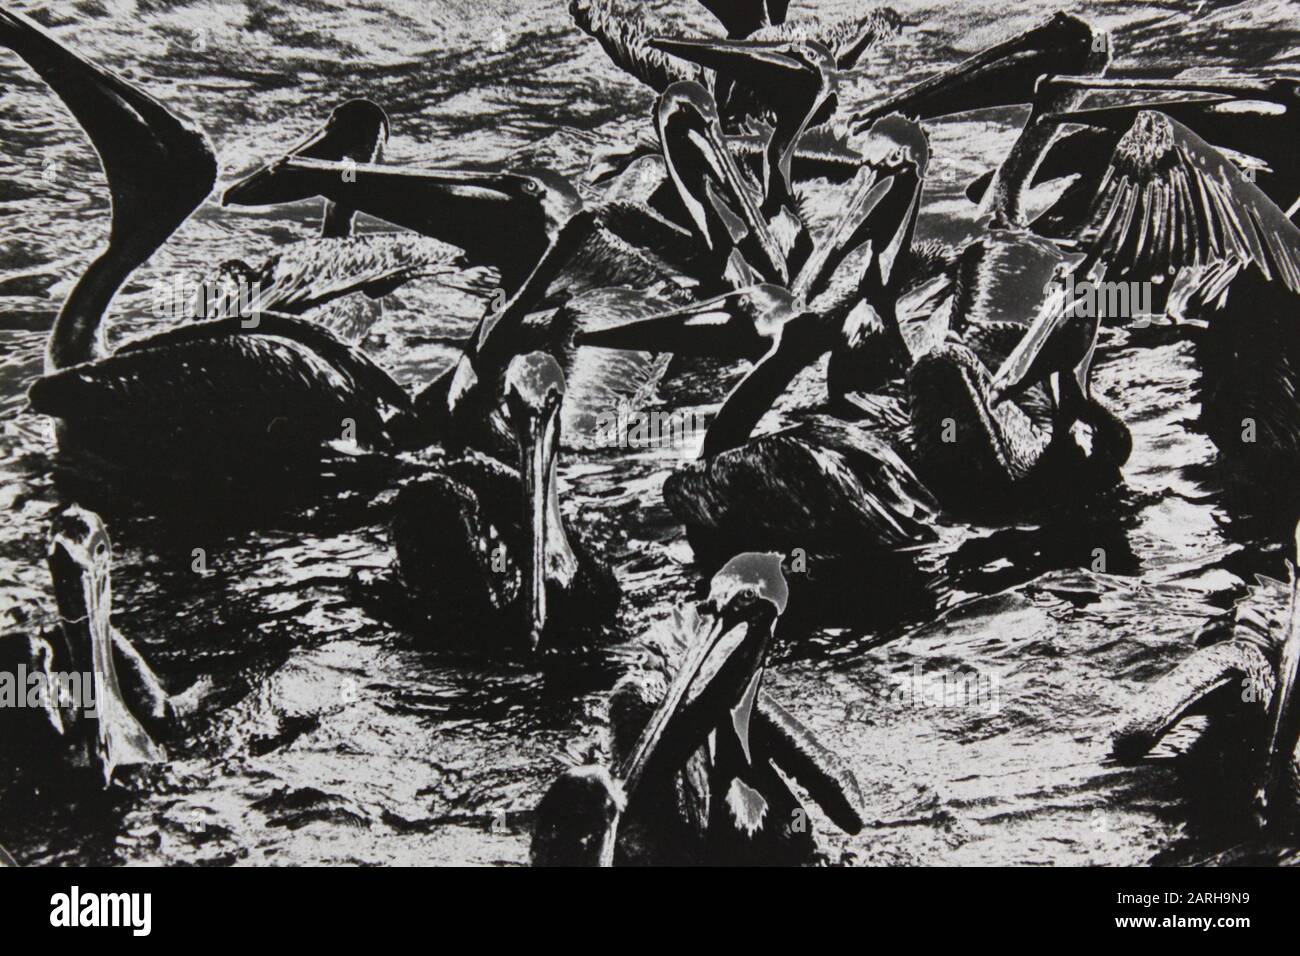 Fine 1970s black and white extreme photography of a bunch of pelicans in a feeding frenzy Stock Photo